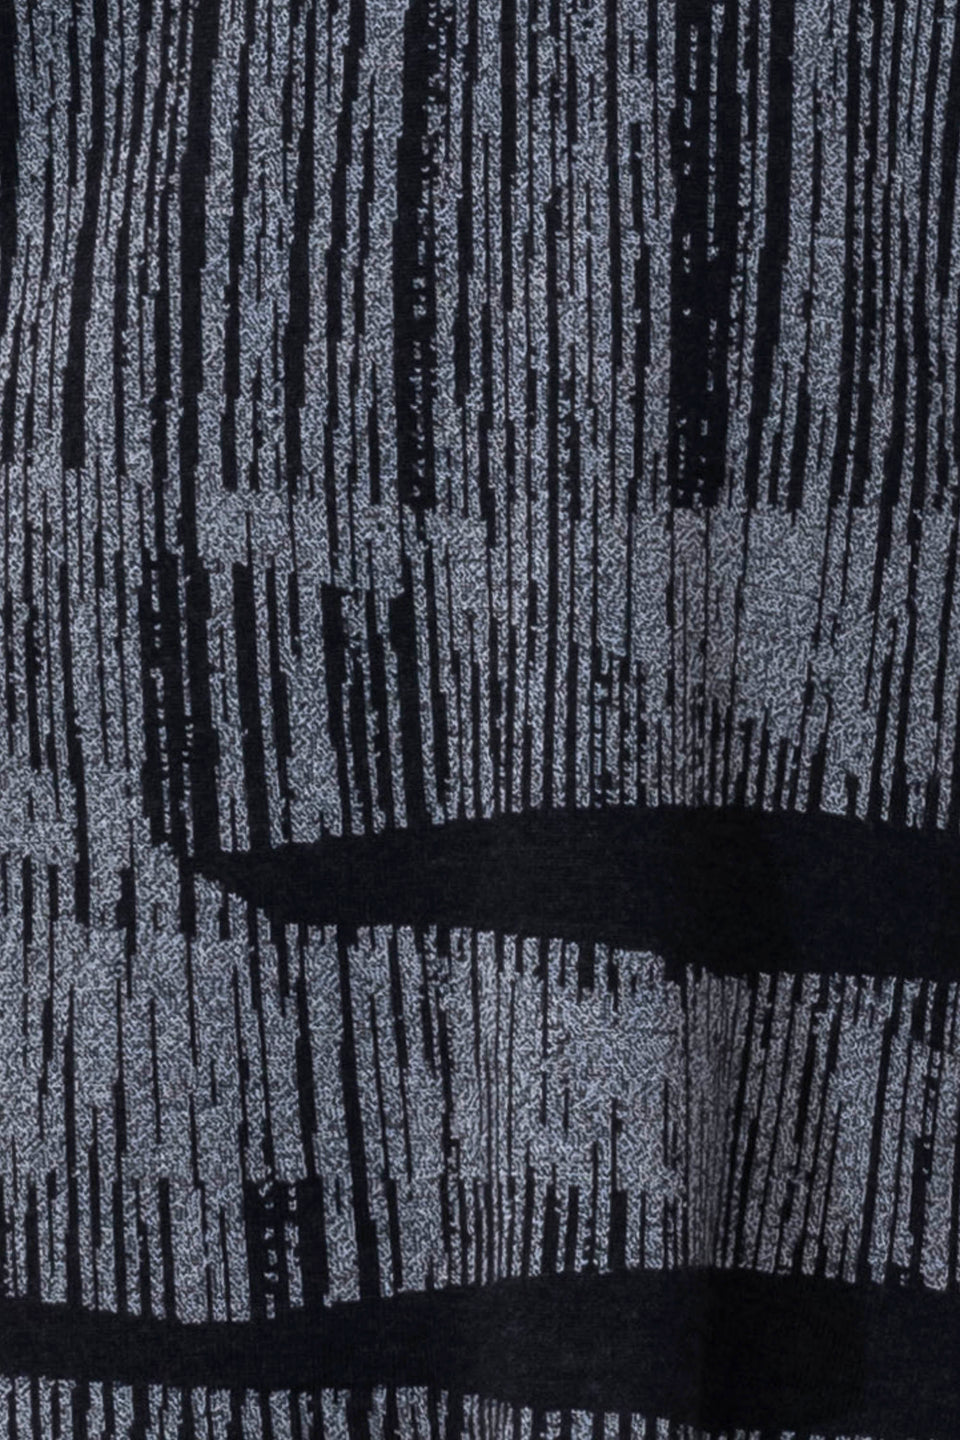 knitted inklines long squint cape swatch. abstract, linear pattern. Shown in moonlight greys